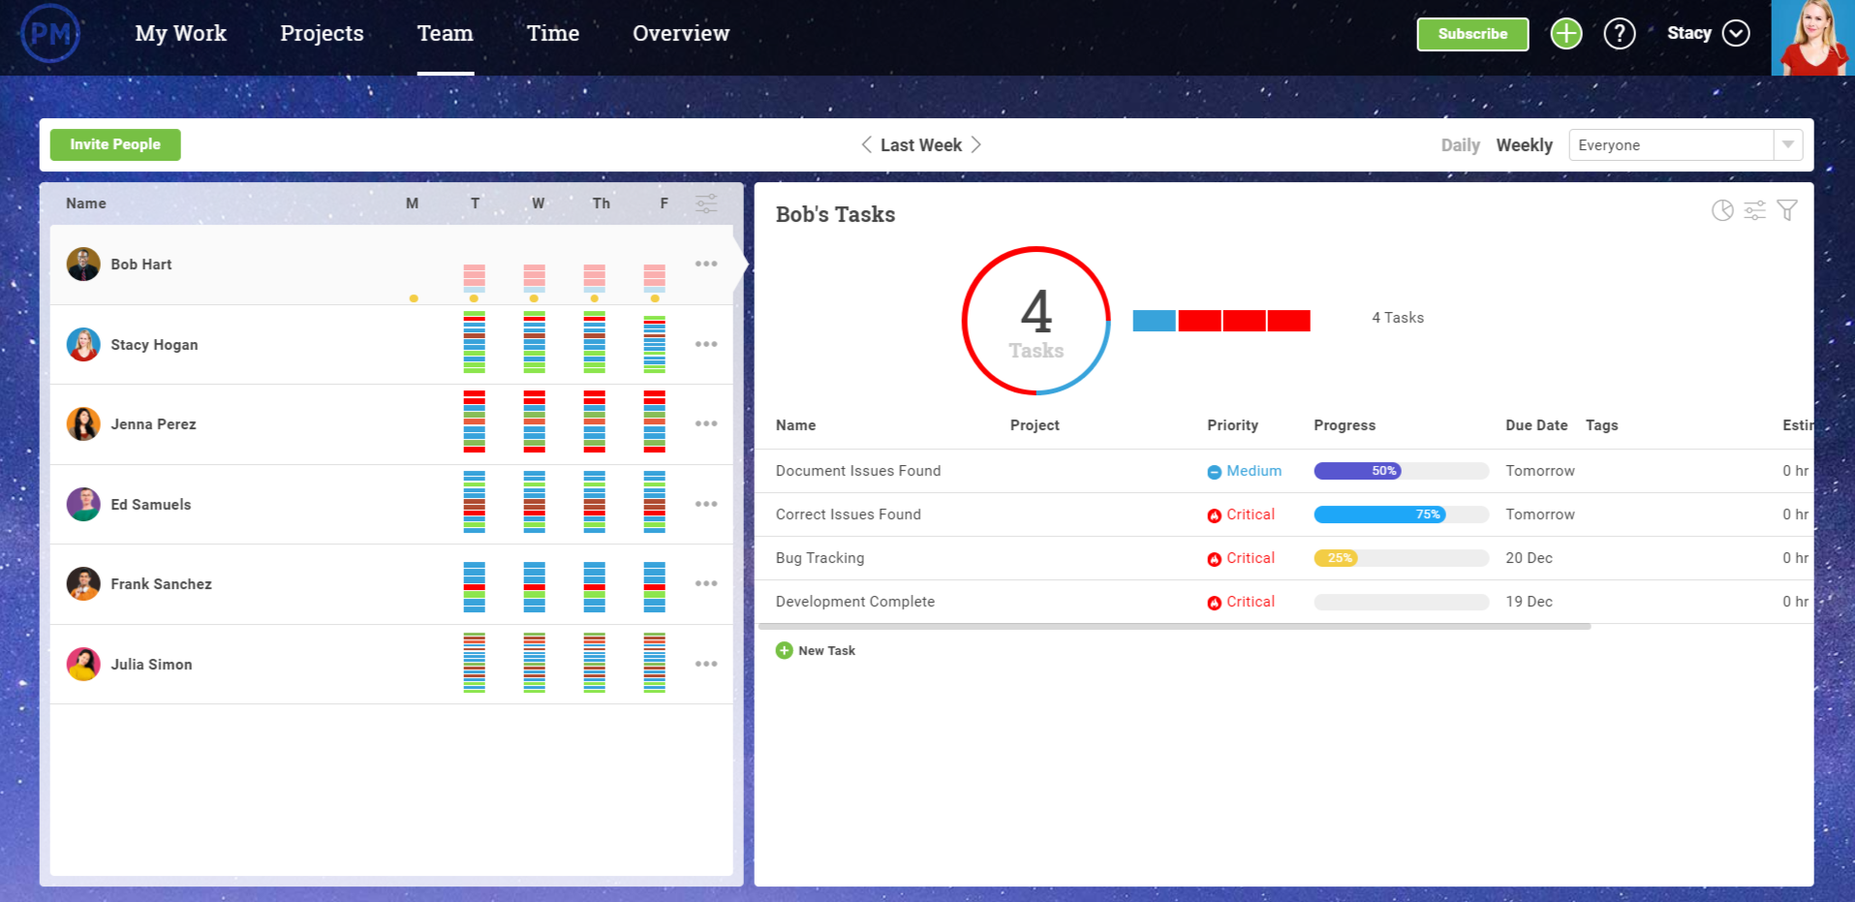 Team section screenshot with weekly tasks shown